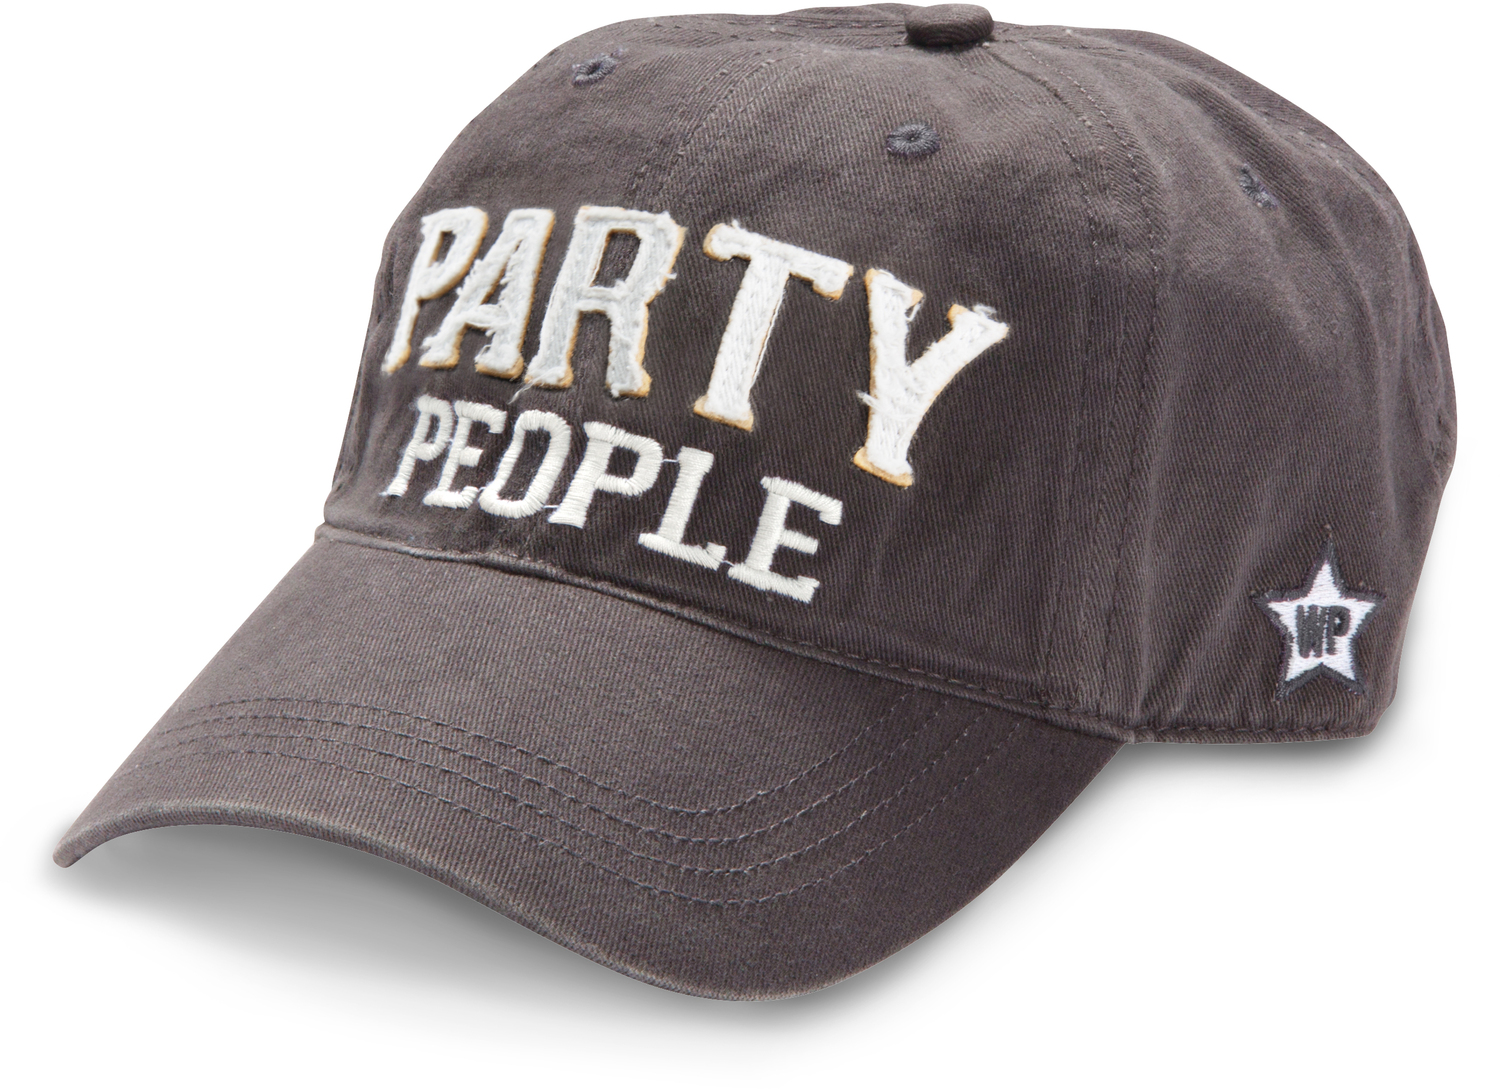 Party People by We People - Party People - Dark Gray Adjustable Hat